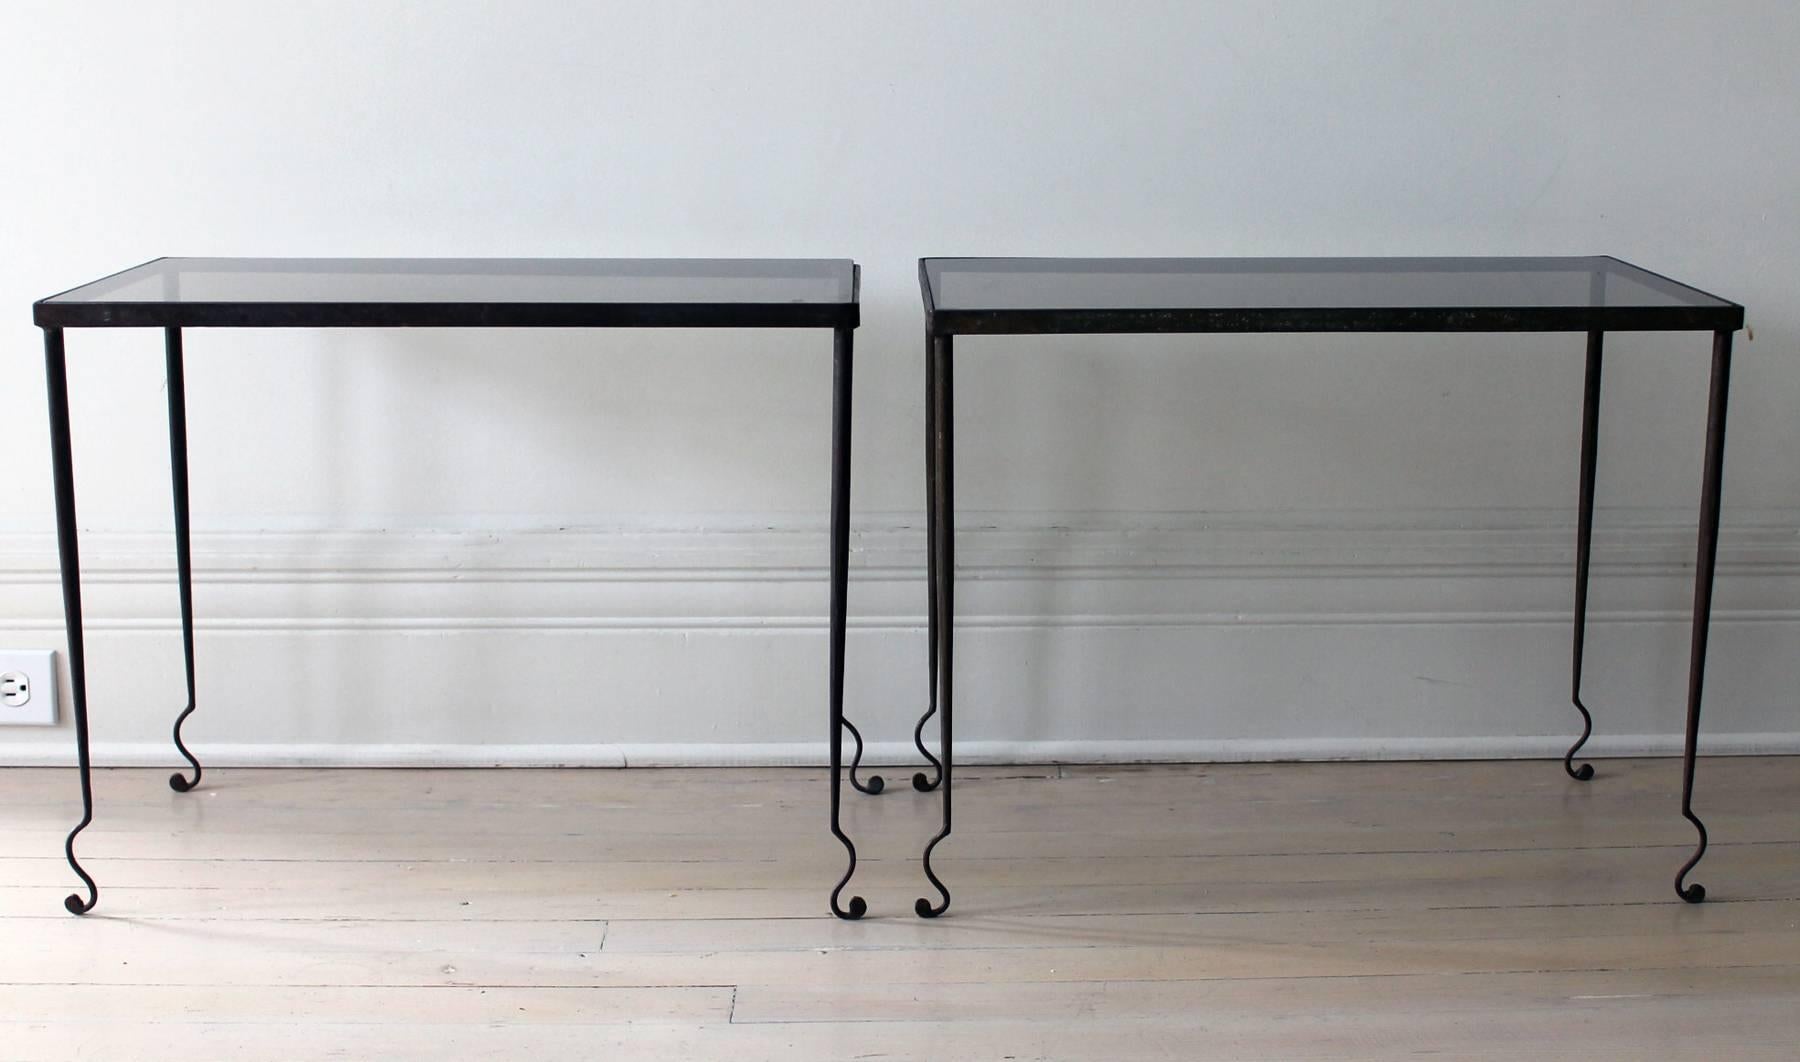 Exquisite French iron base tables from 1930s. The rectangular, brown smoky glass top raised on tapered cylindrical legs terminating with scrolled feet. Published in: Decoration Au'jourd'hui No 16 1936 cover illustration of the tables.